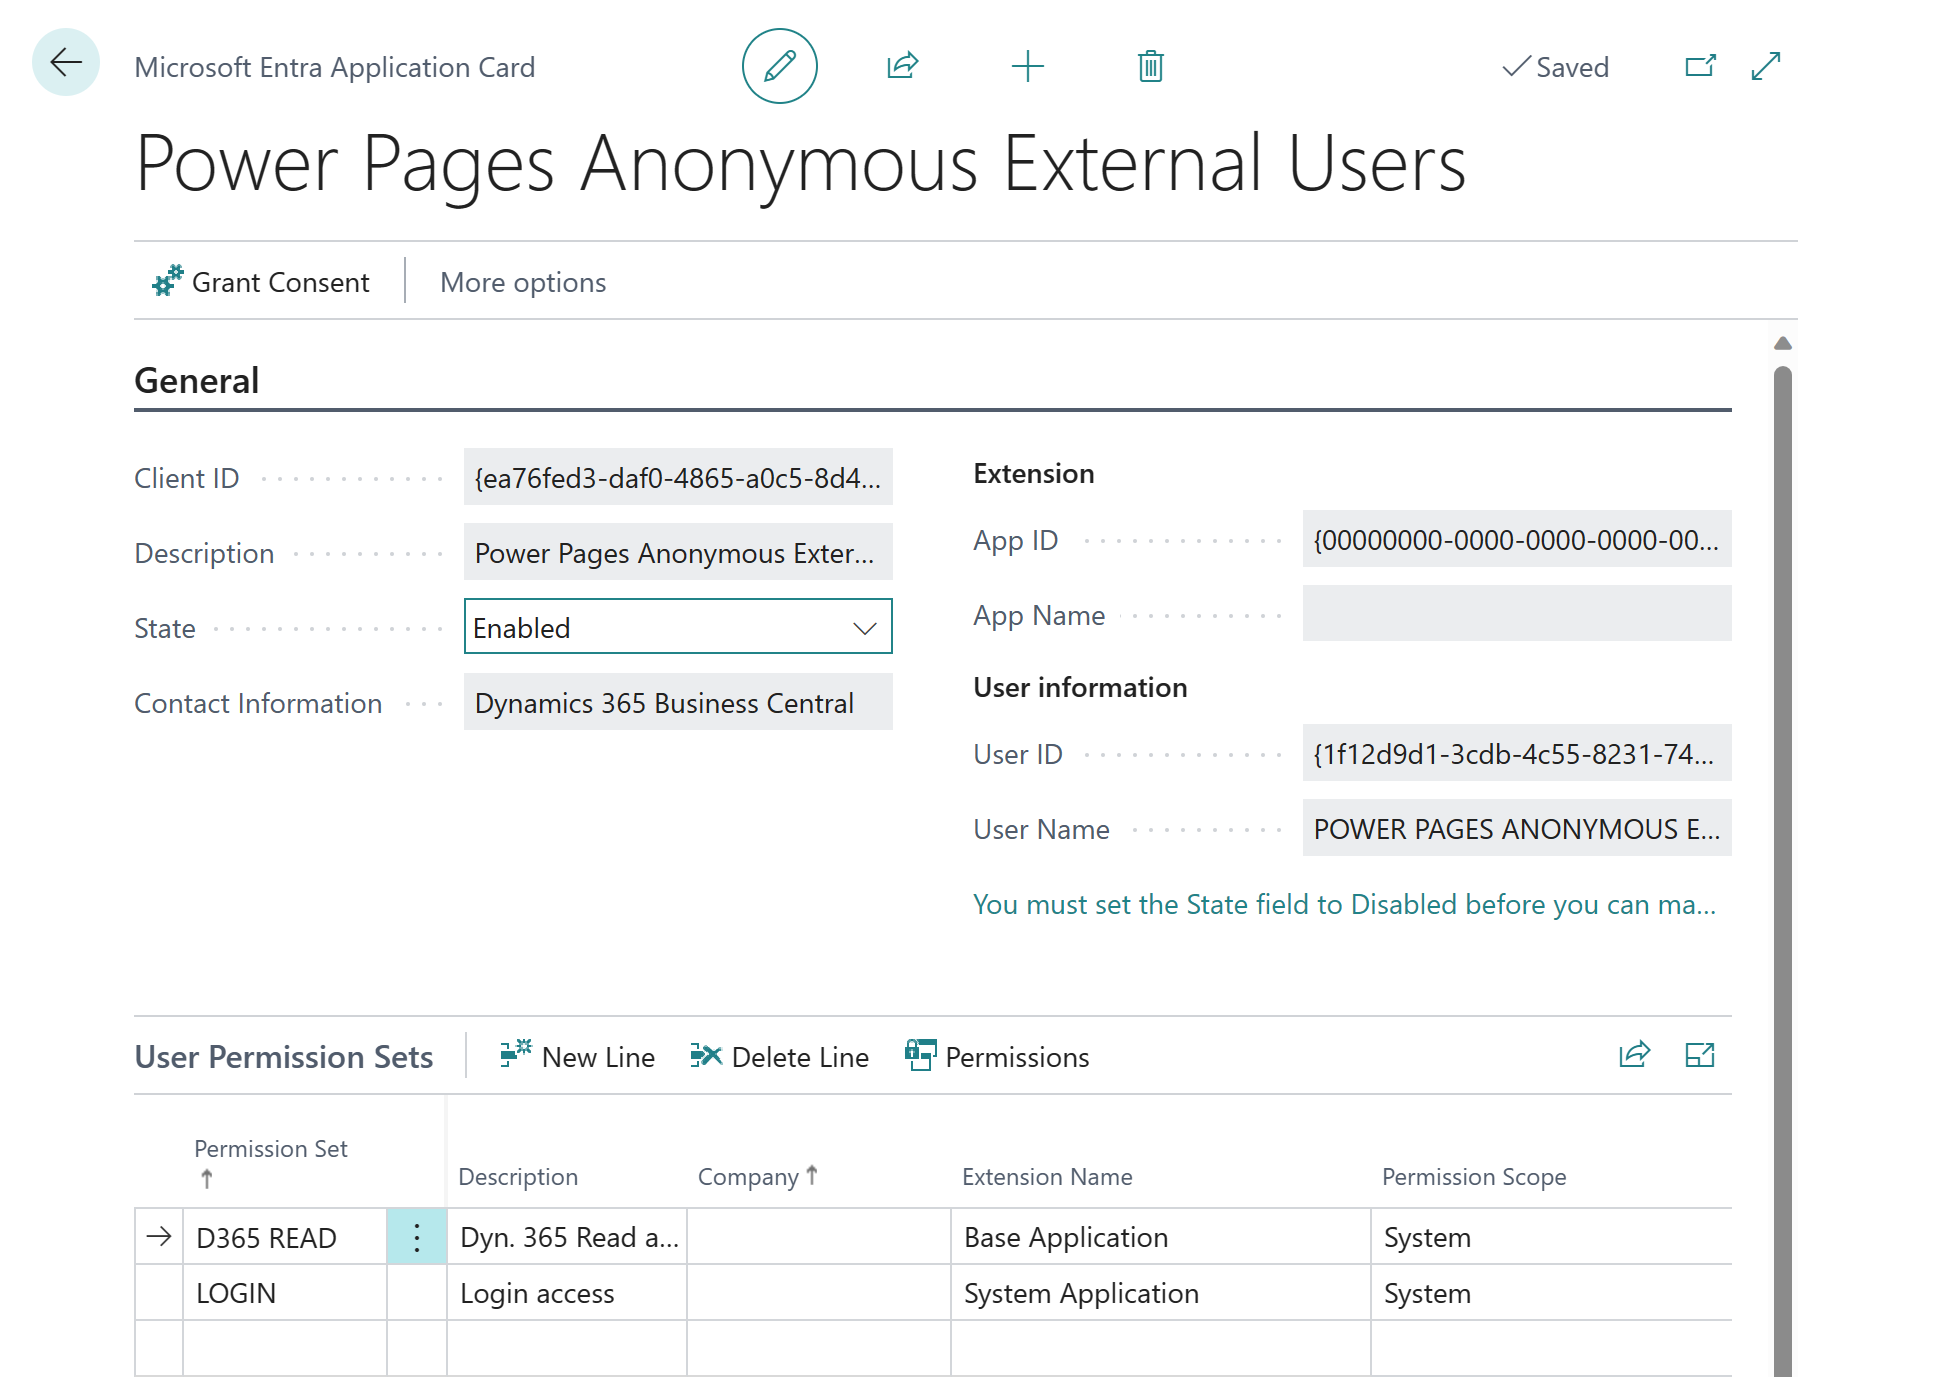 Screenshot of the Power Pages Anonymous External Users card in Business Central